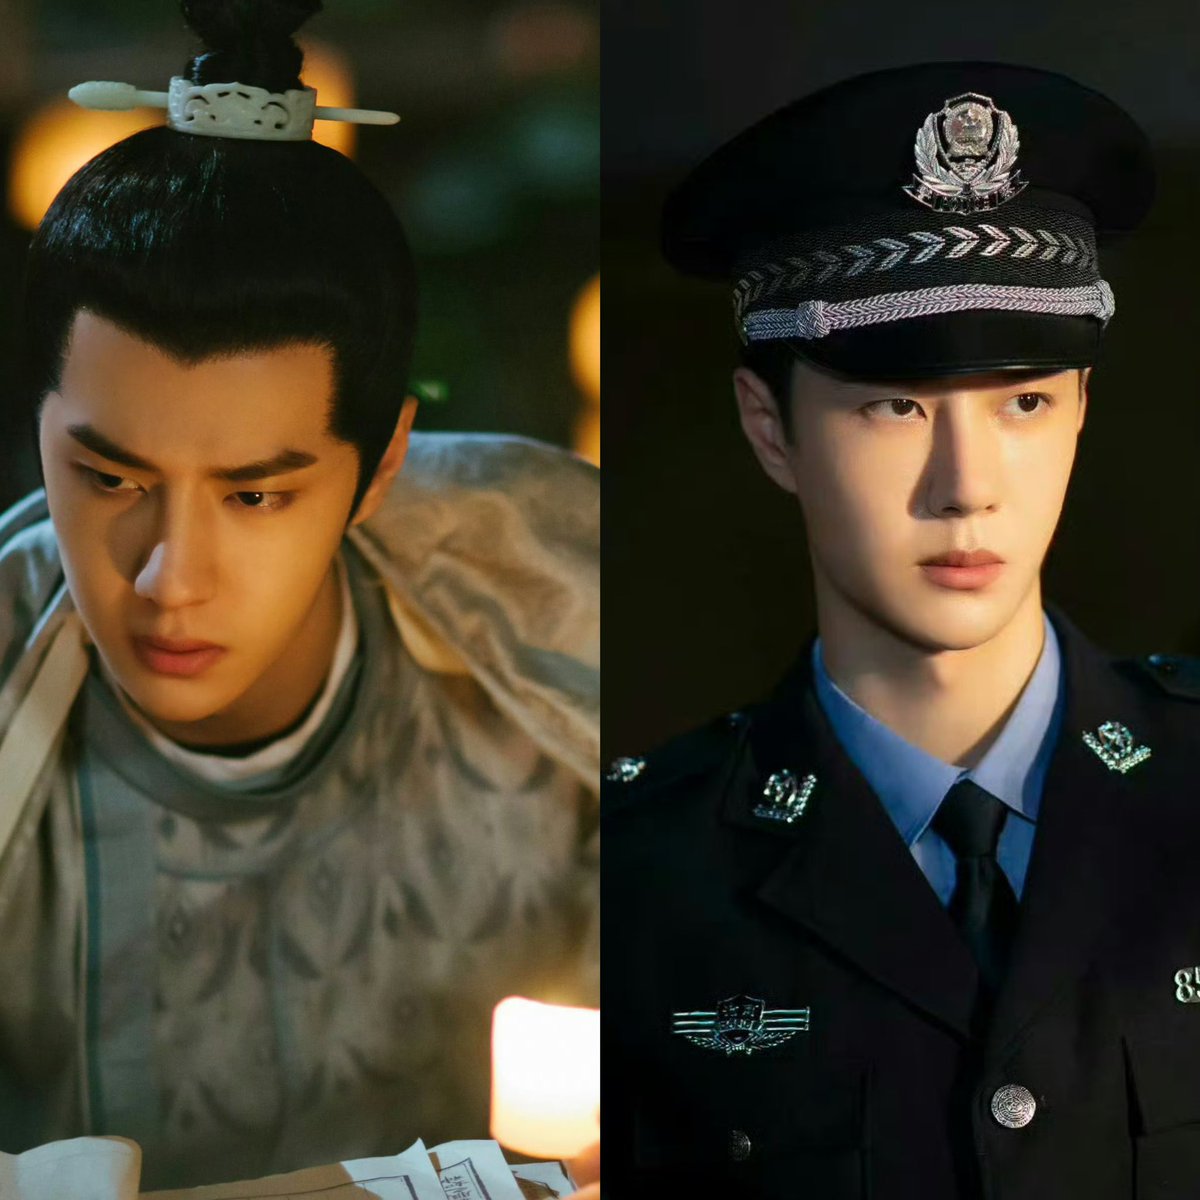 Among the dramas that  #WangYibo has appeared in, the cultural one is Luoyang(风起洛阳), and the drama with social messages is BAH(冰雨火). These two dramas are mentioned in the '2023 Chinese Drama Dev Report(广电总局2023中国剧集发展报告)'